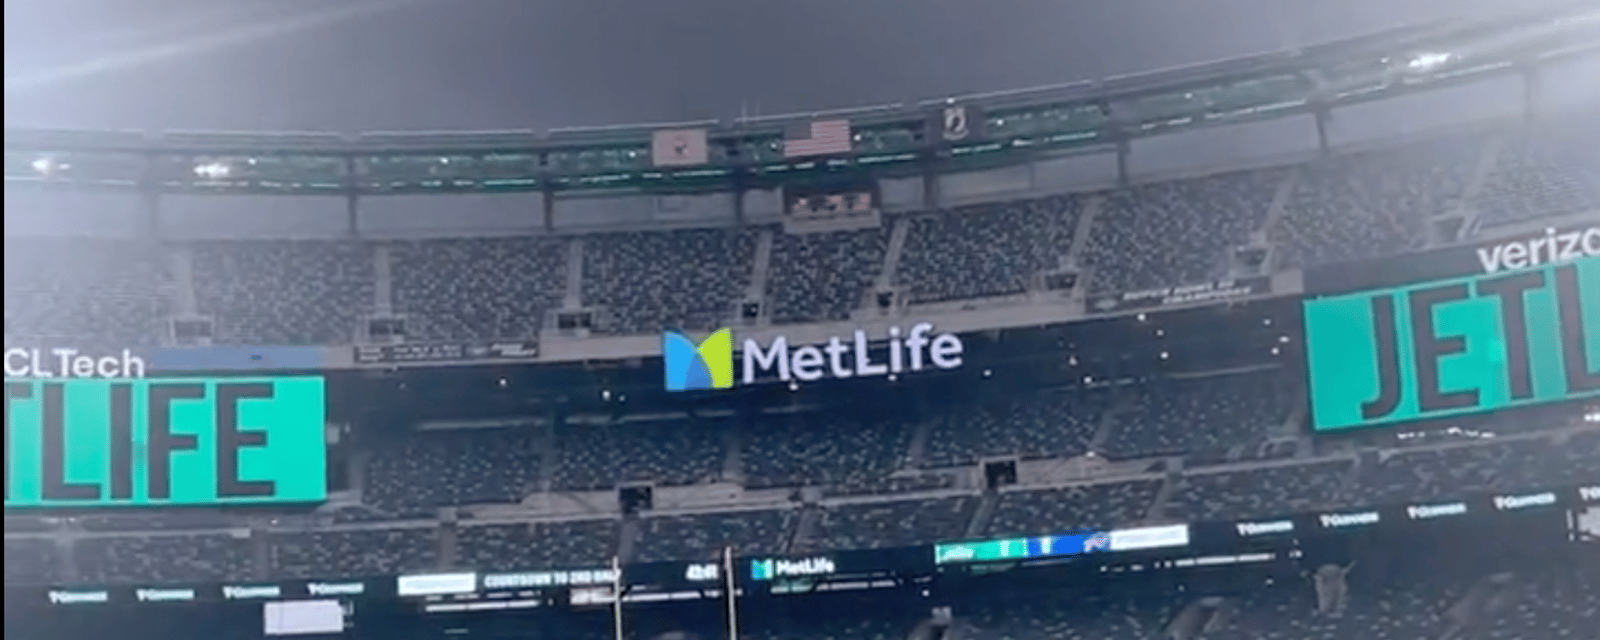 NFL issues chilling “shelter in place” warning at MetLife Stadium 